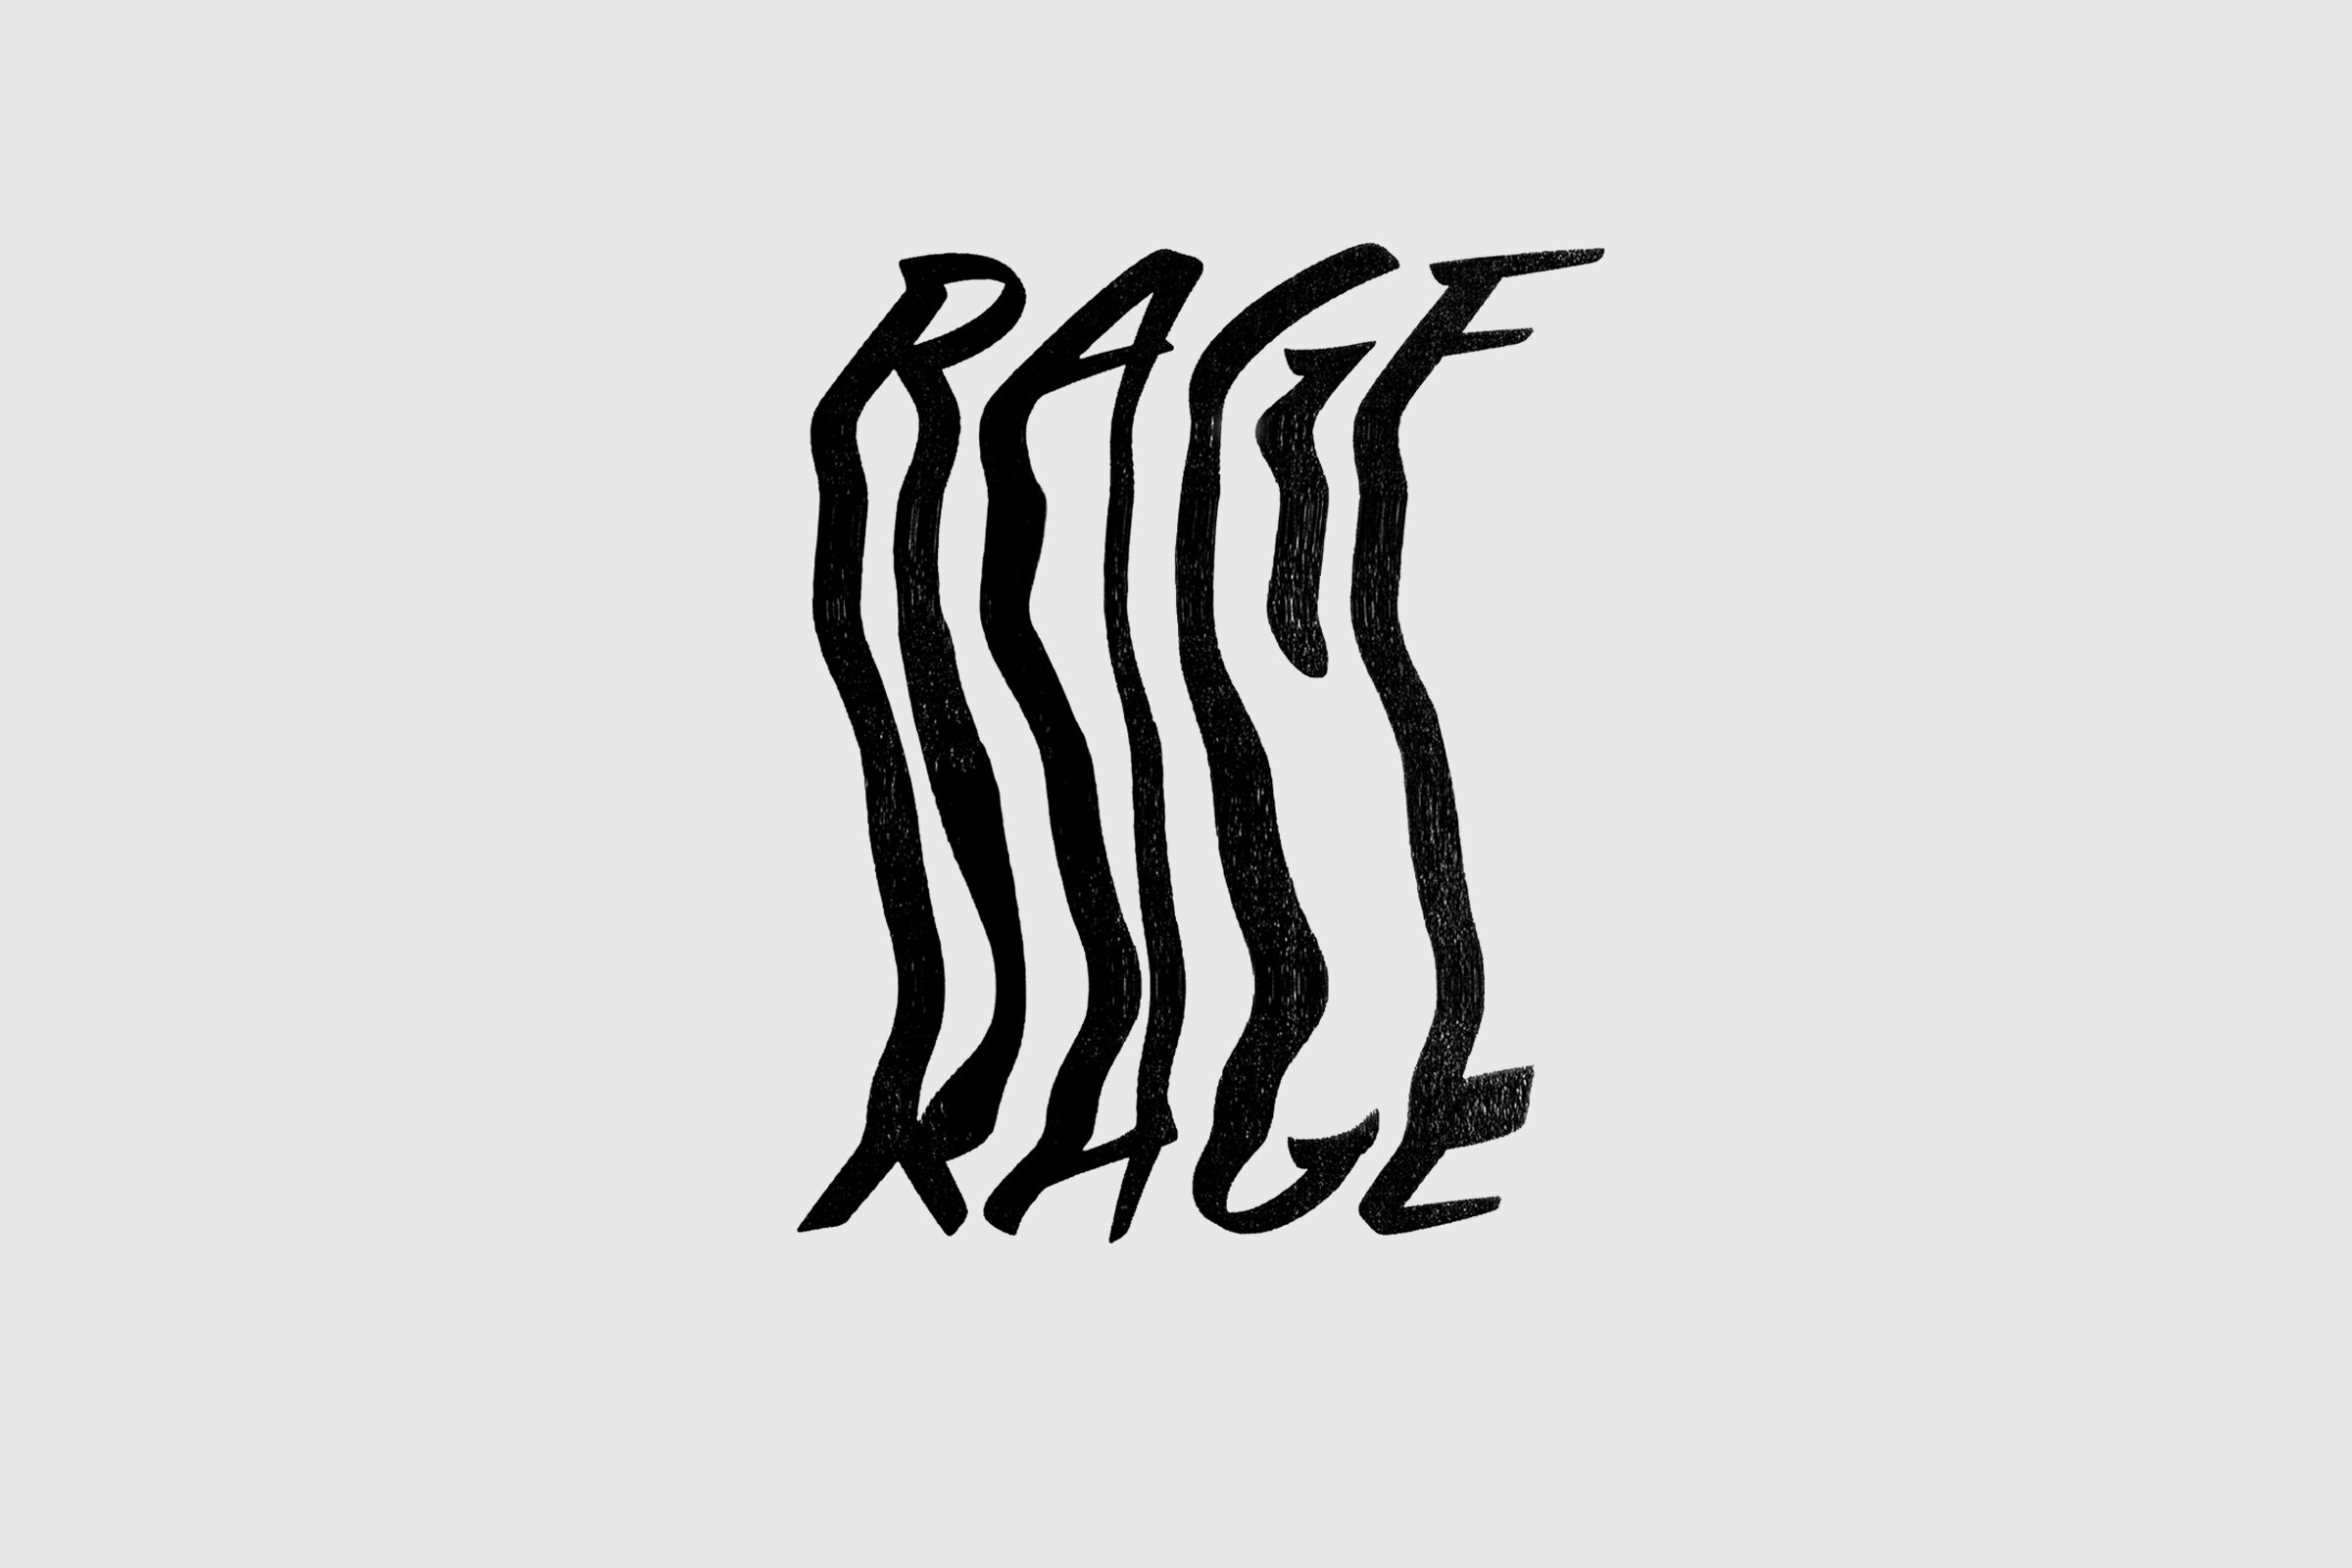 The Rage Tote Bag Lettering